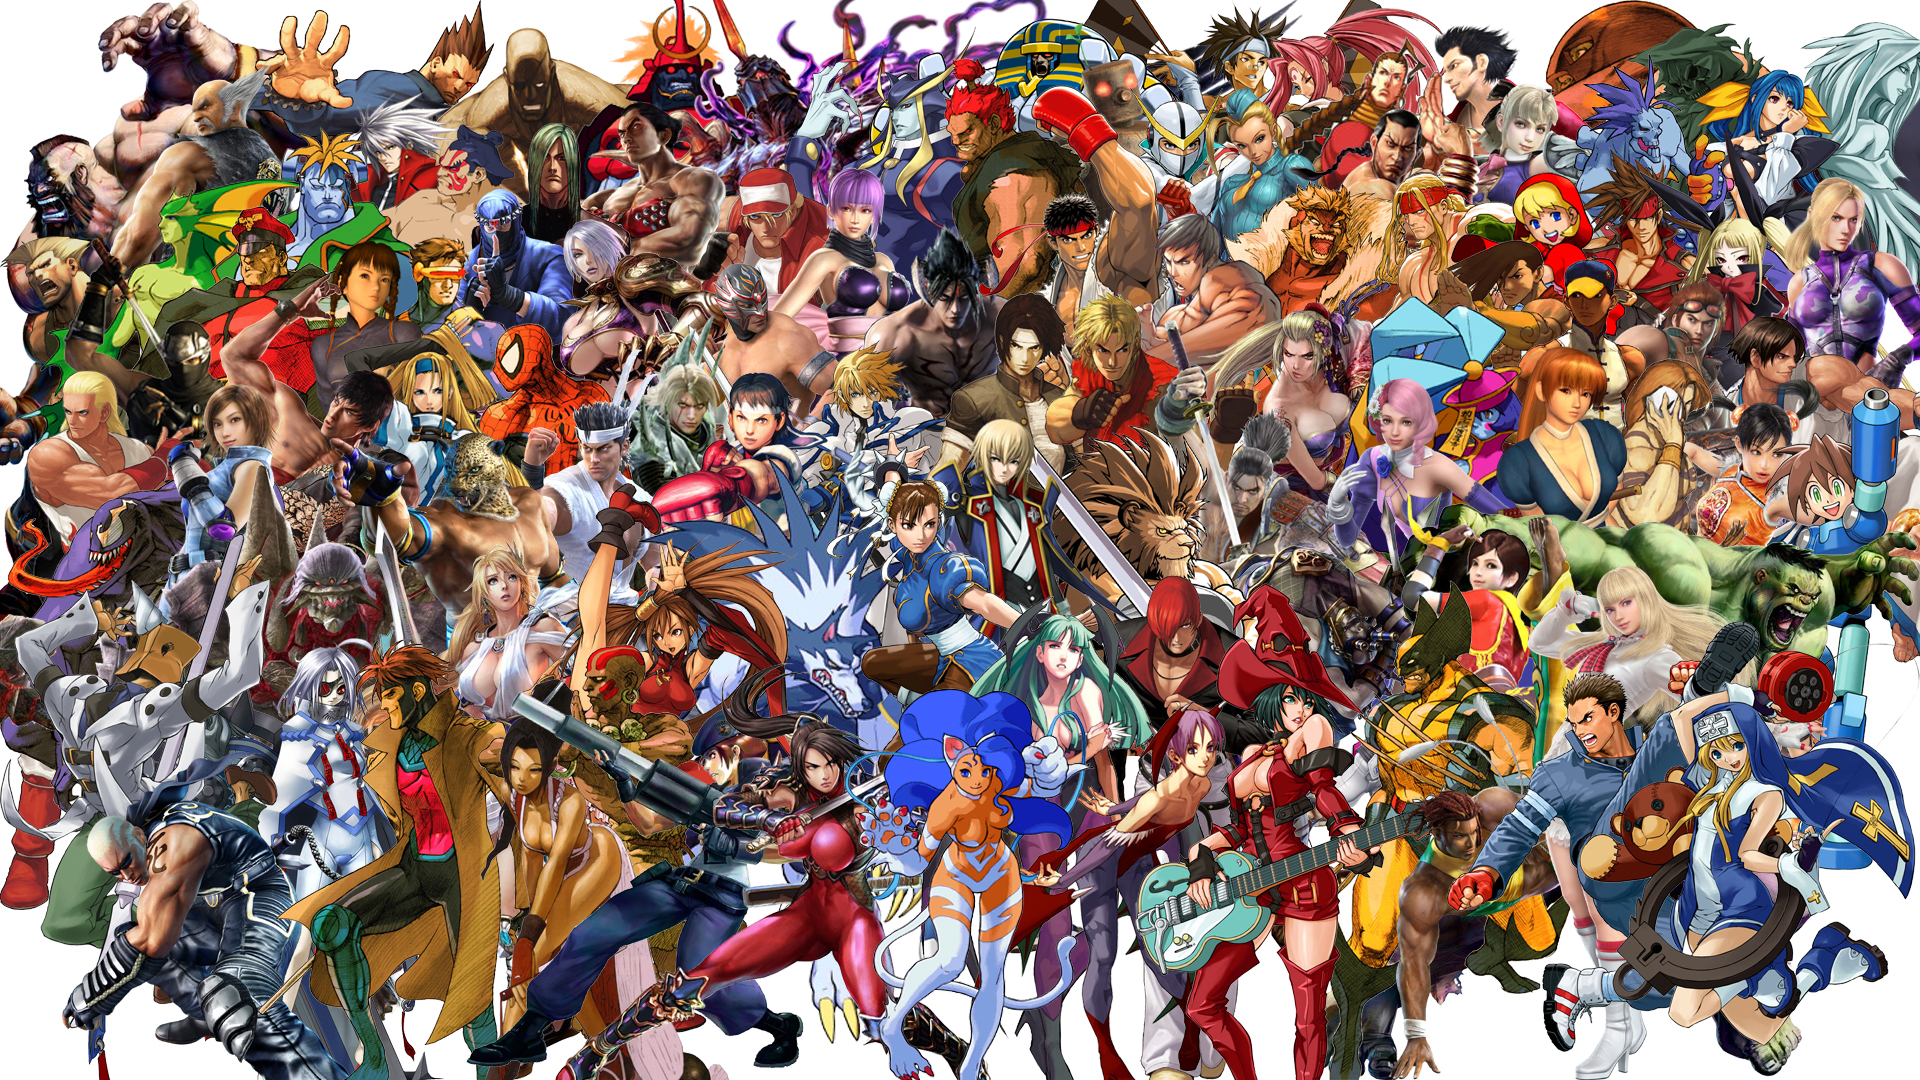 What franchises need a fighting game?